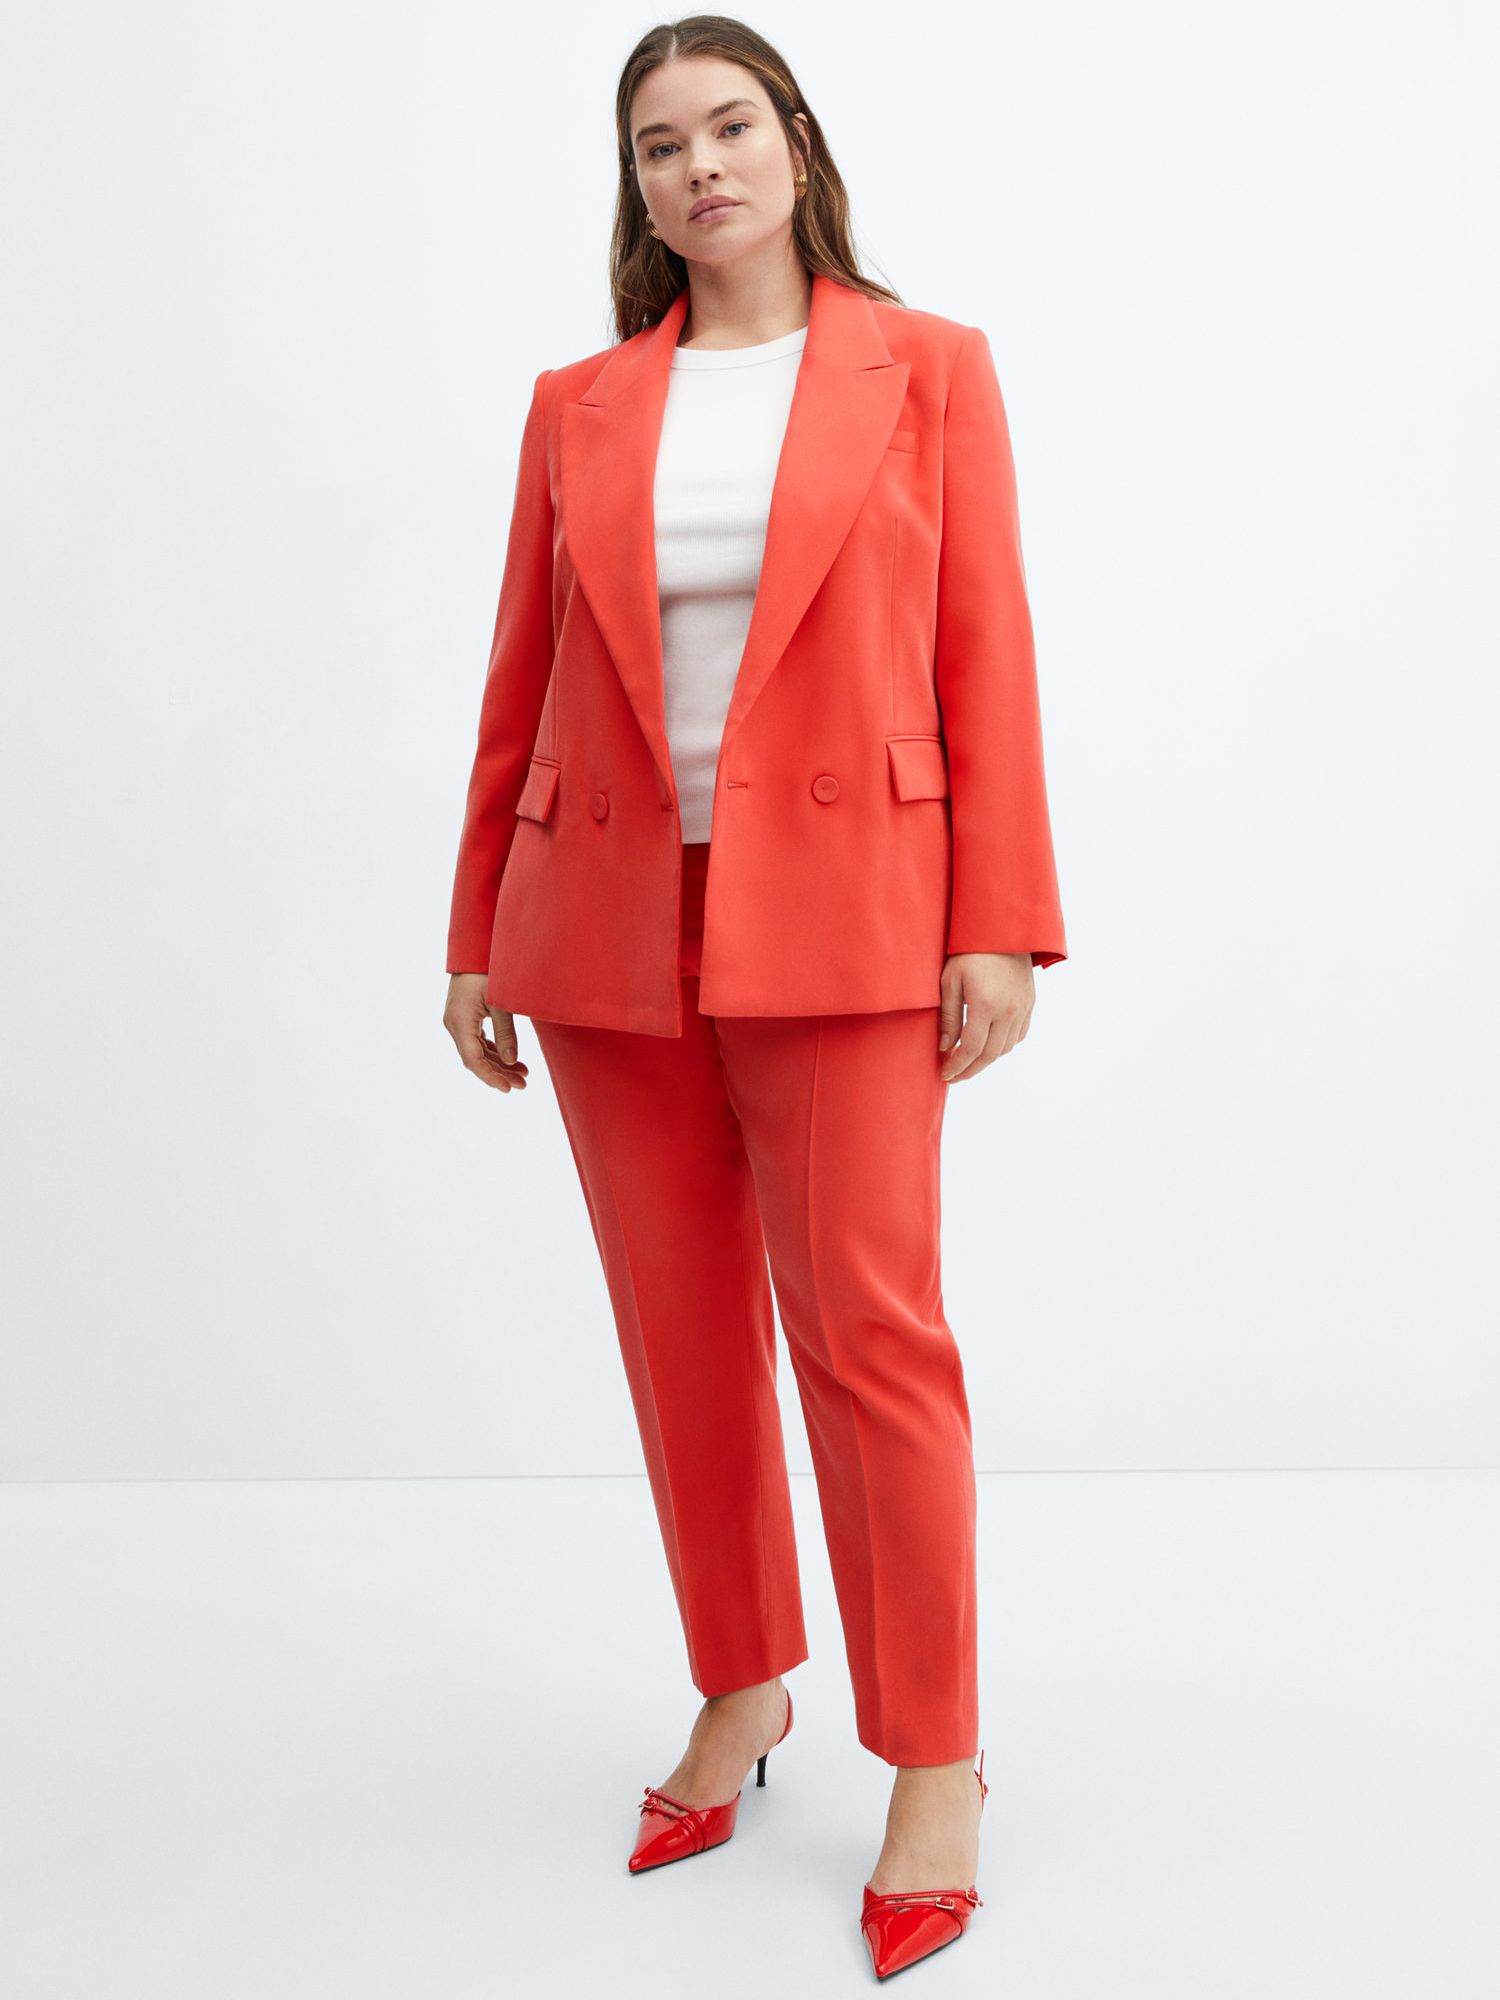 Buy Mango Tempo Double Breasted Suit Blazer Online at johnlewis.com